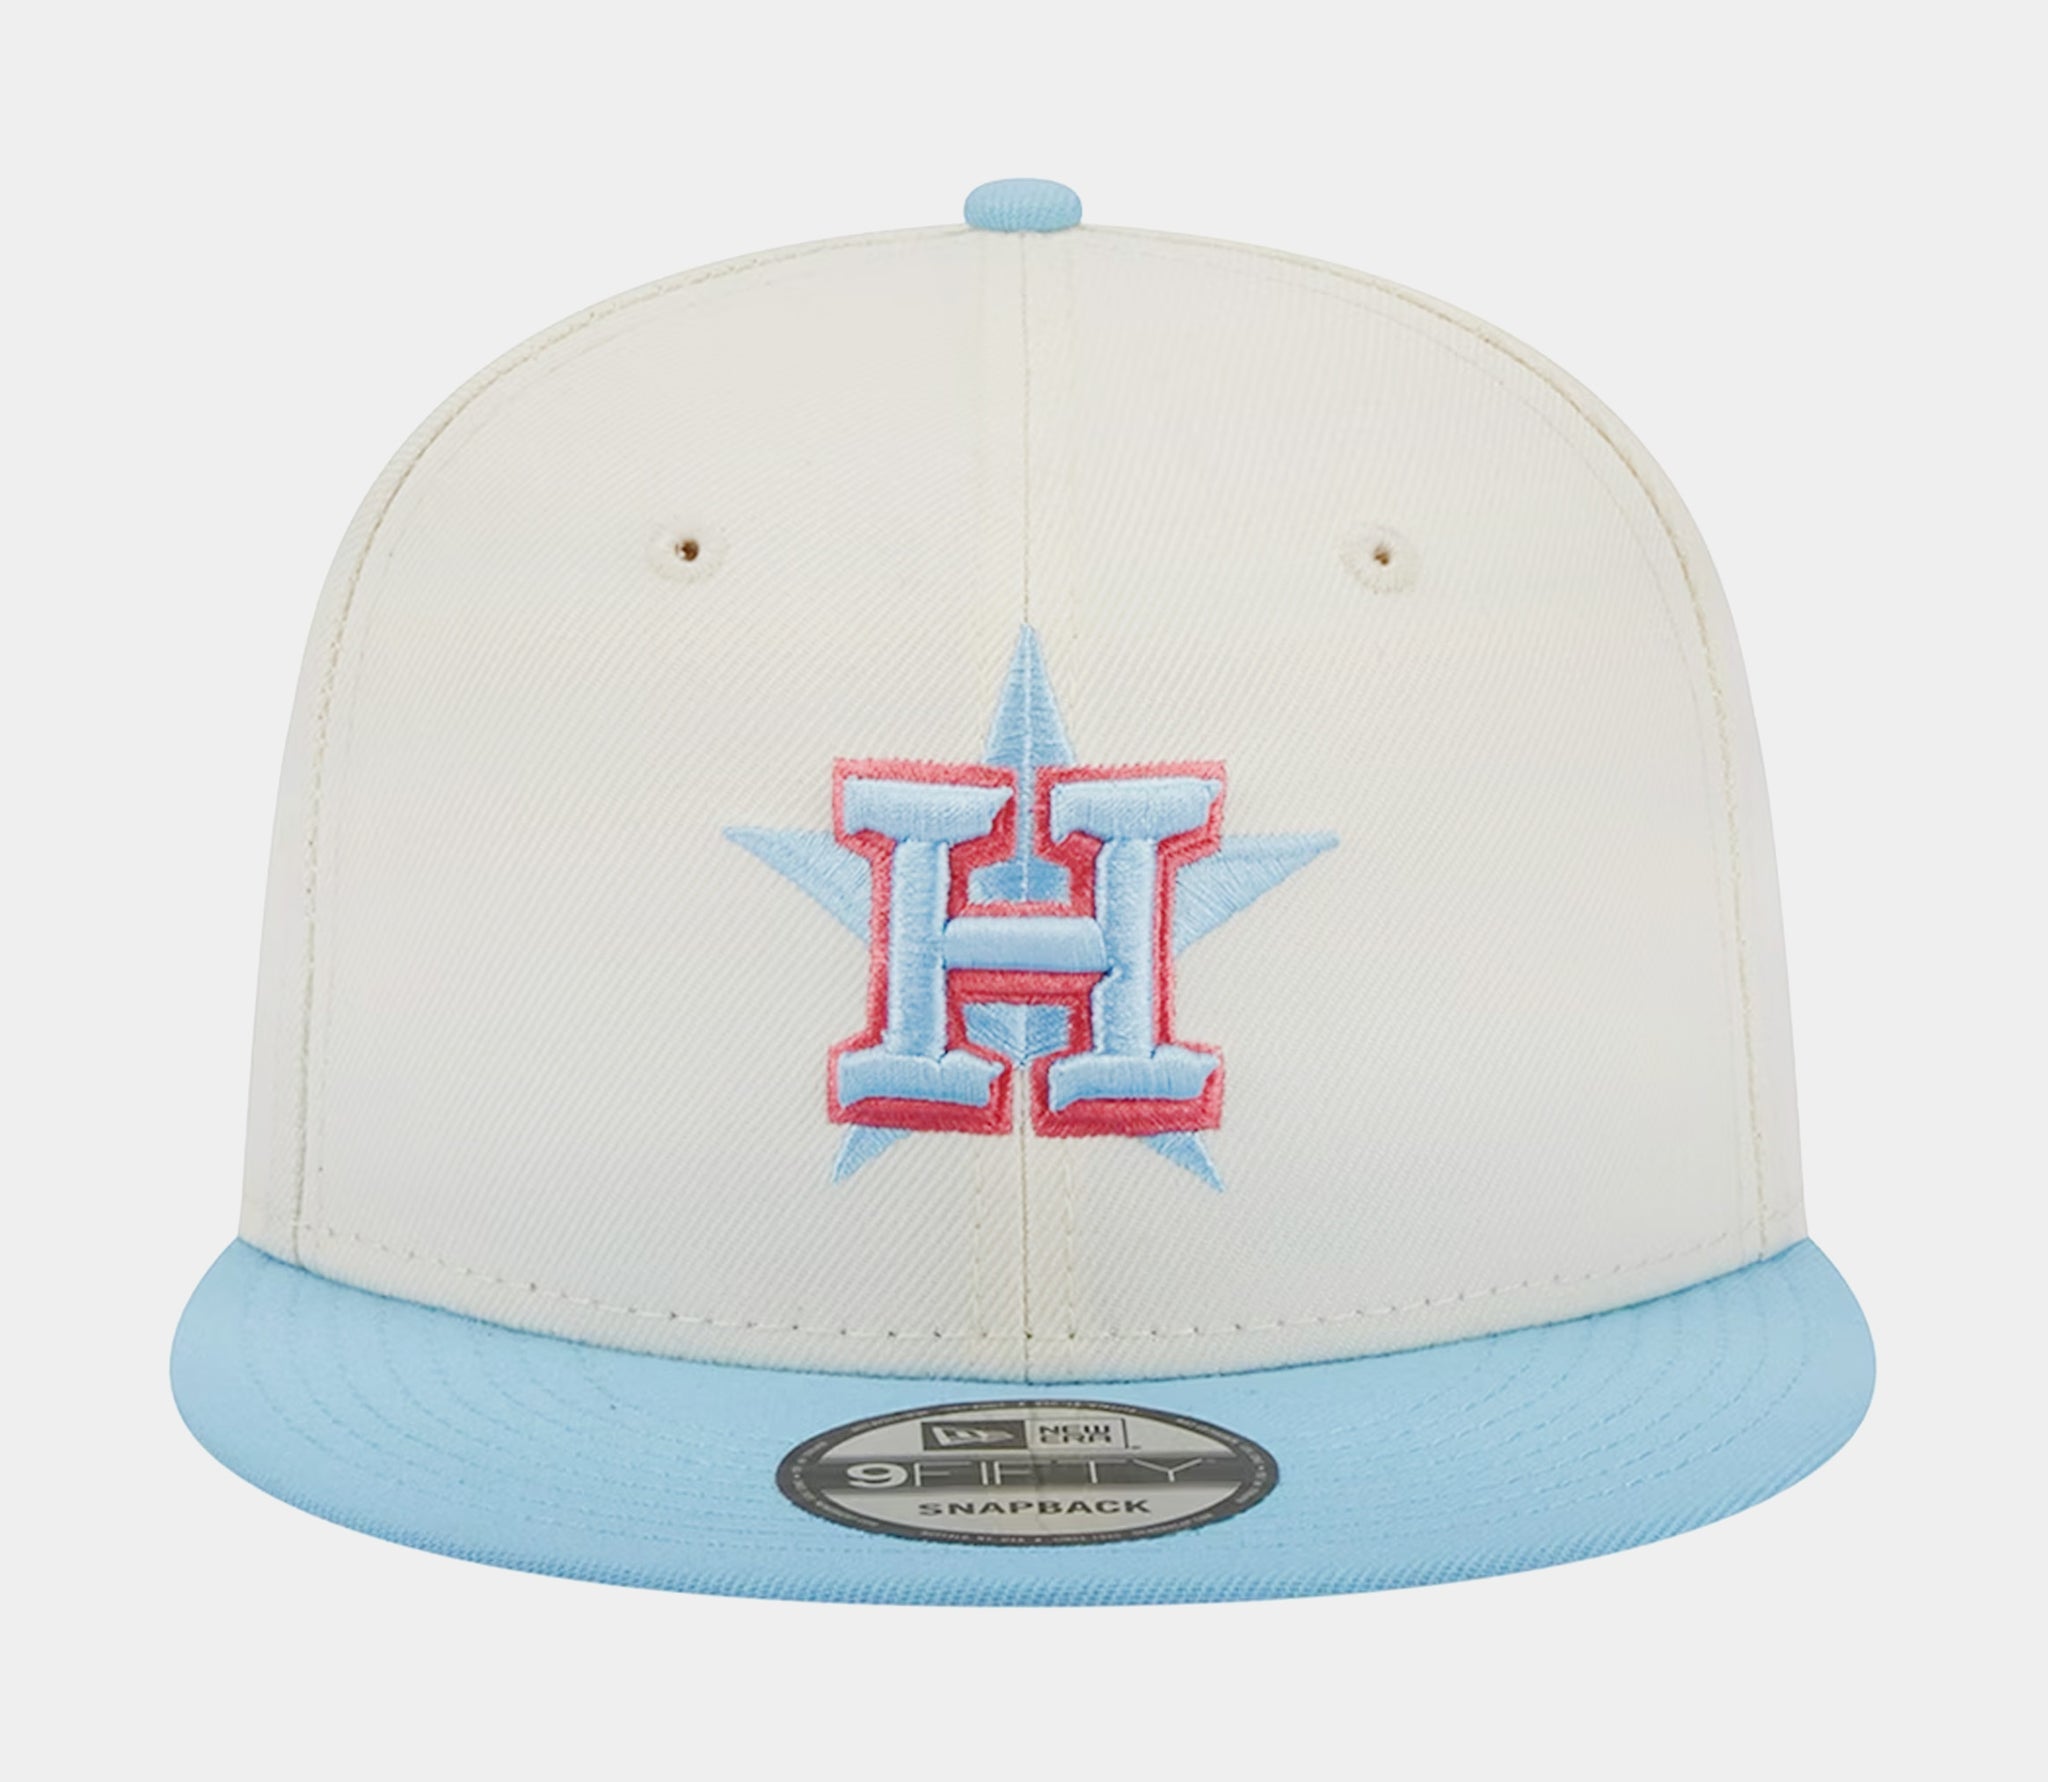 New Era Texas Rangers Colorpack 59Fifty Mens Fitted Hat Blue White